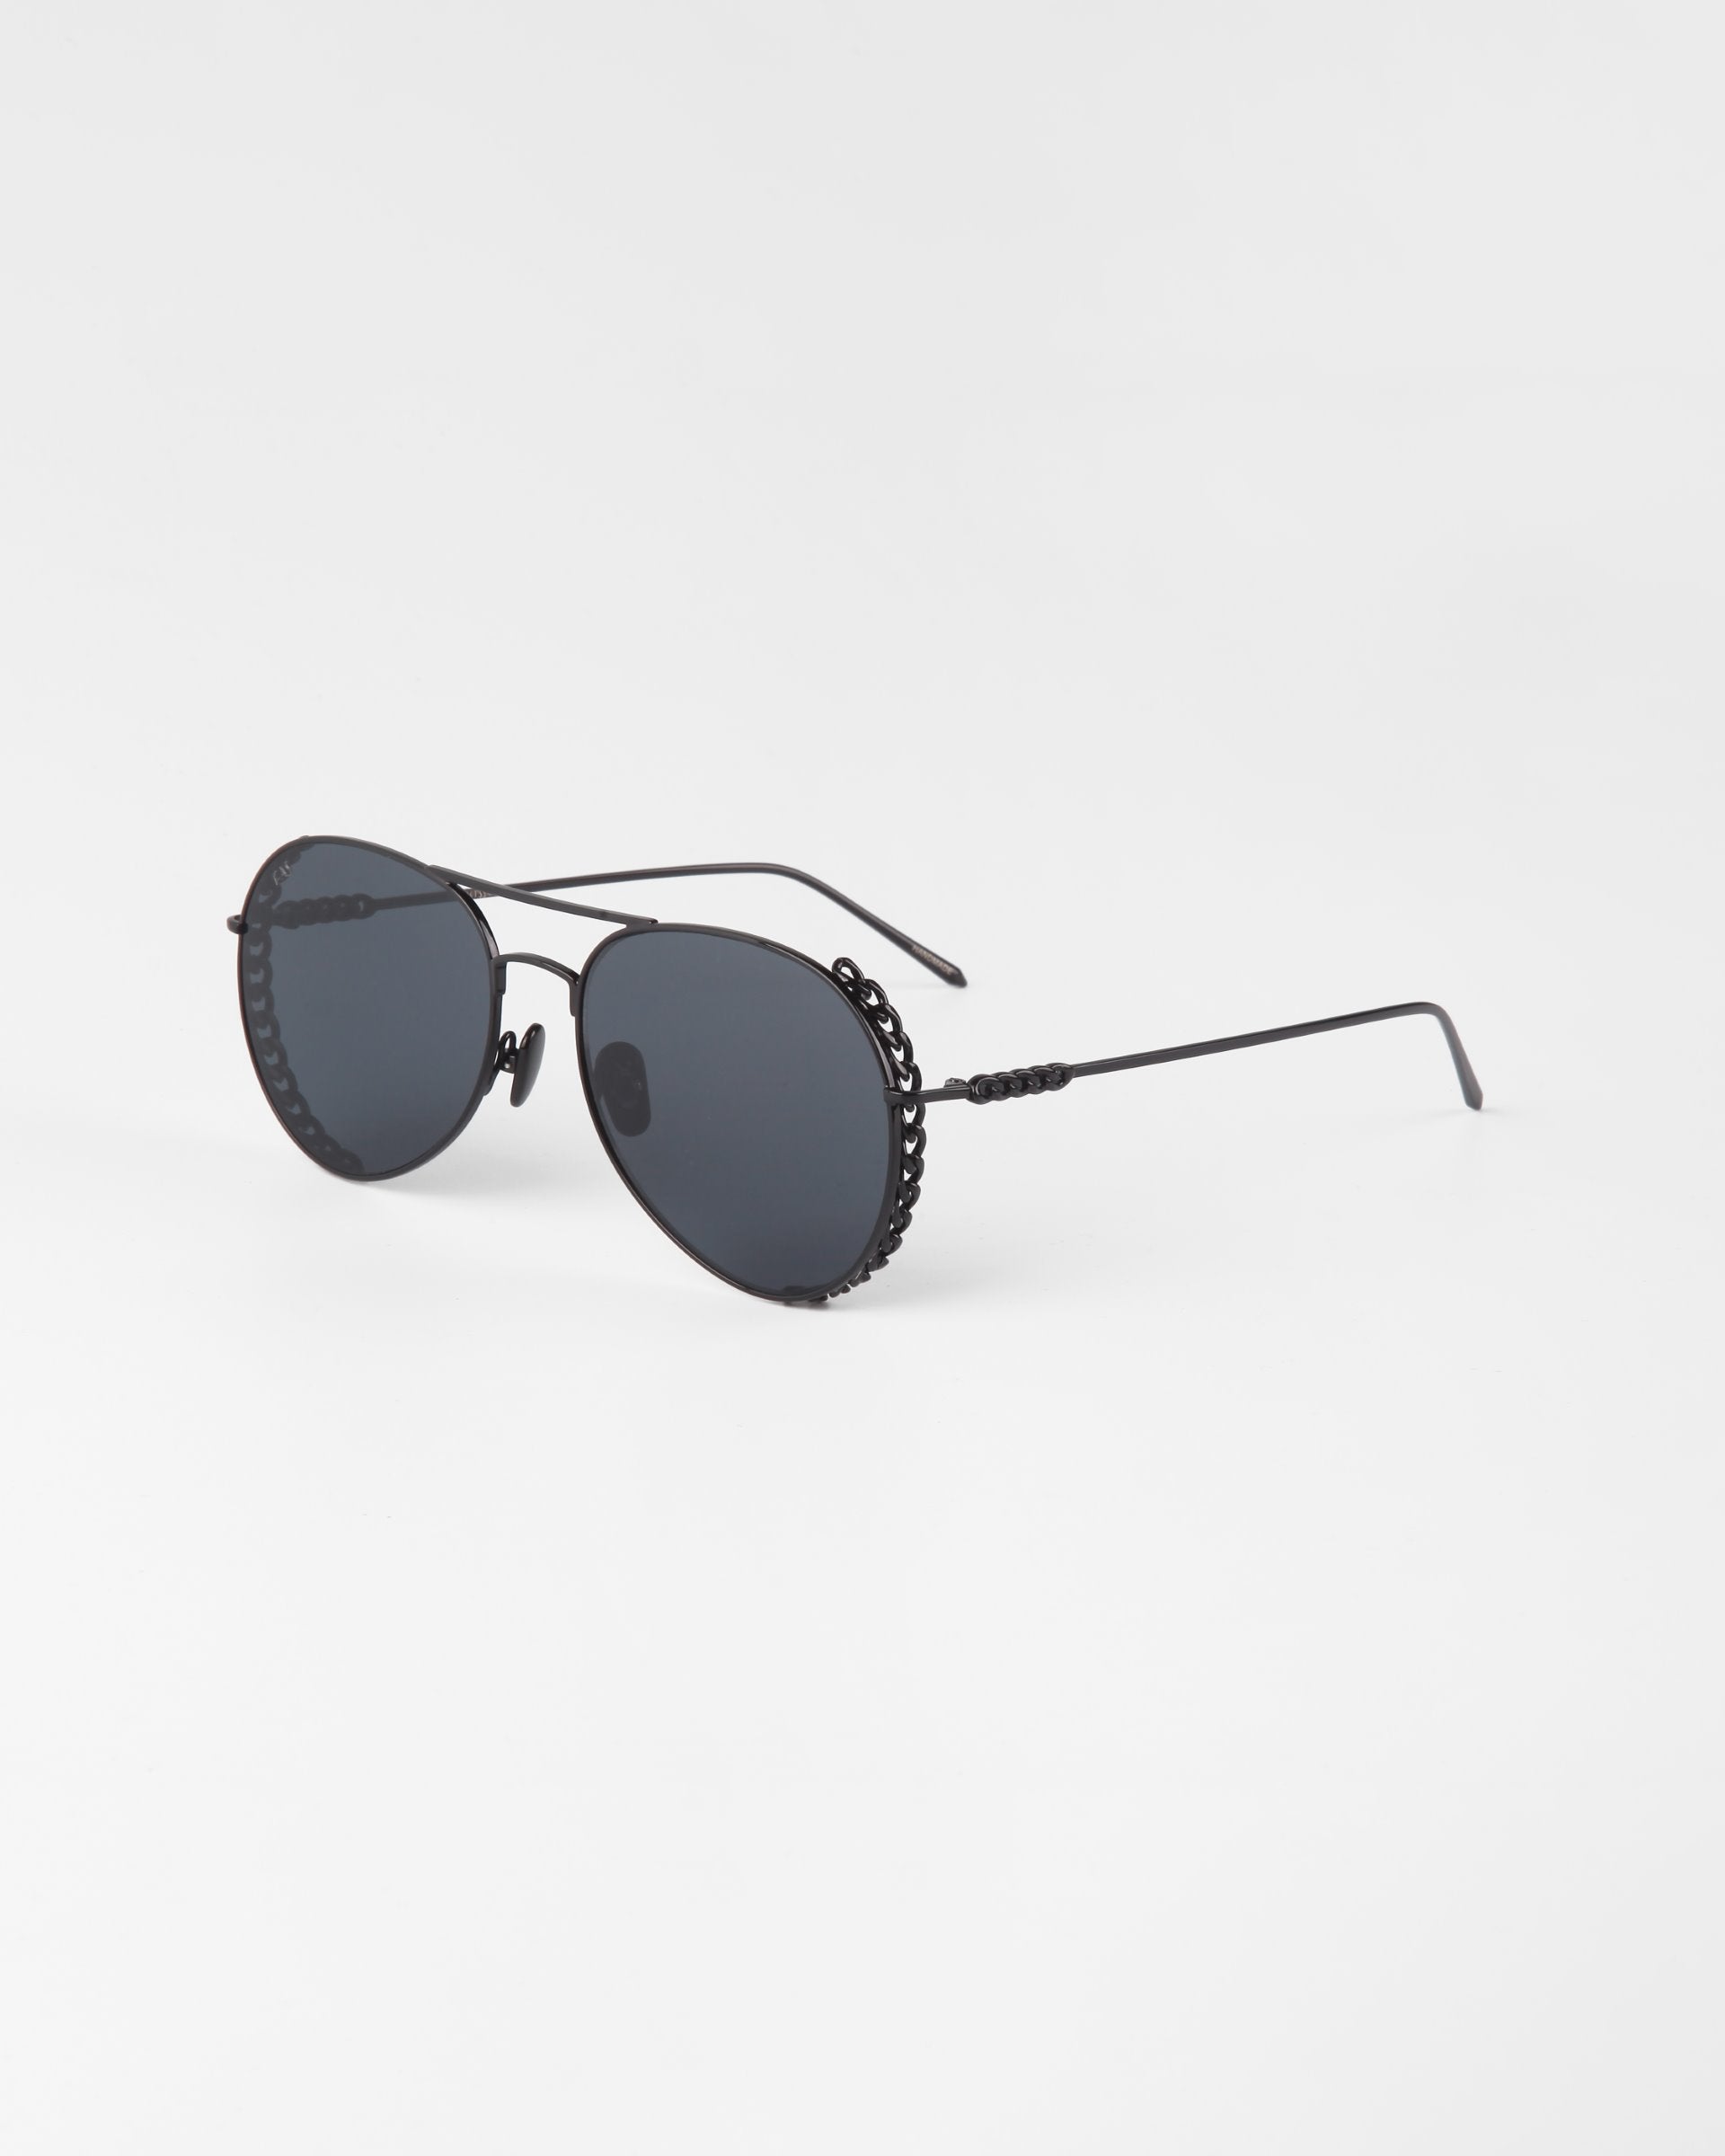 A pair of stylish black aviator sunglasses with dark nylon lenses, named Links by For Art&#39;s Sake®. The thin, gold-plated stainless steel frames are ornate, featuring intricate detailing on the sides. Placed on a plain white background and angled slightly to the left, they exude an air of elegance.